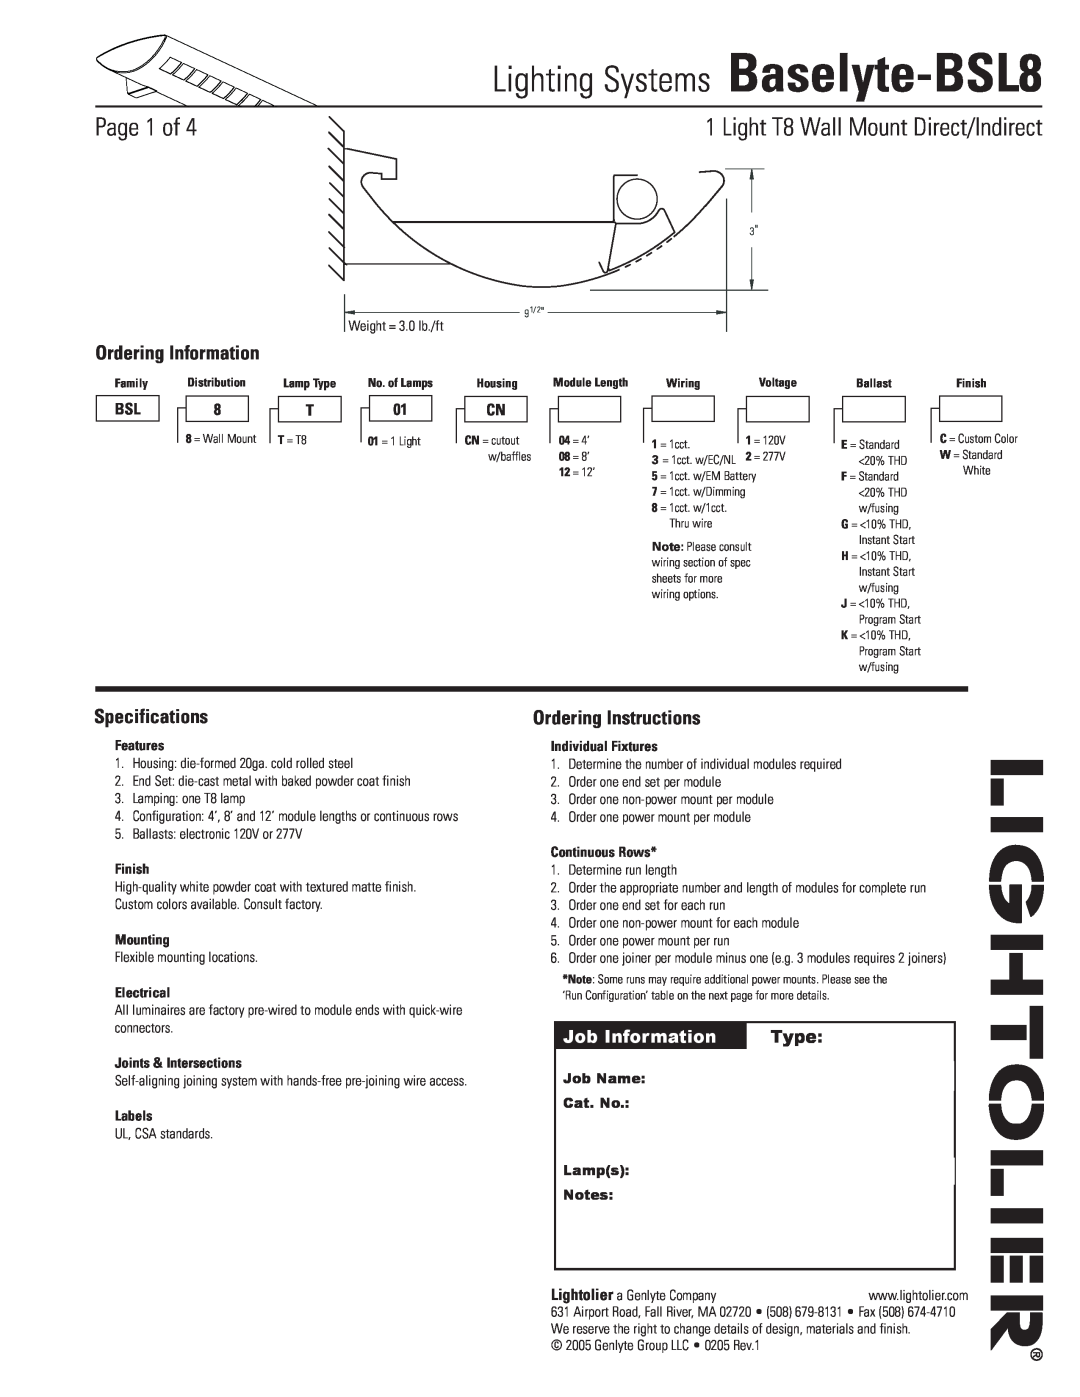 Lightolier specifications Lighting Systems Baselyte-BSL8, Page  of, Light T8 Wall Mount Direct/Indirect, Type, Finish 